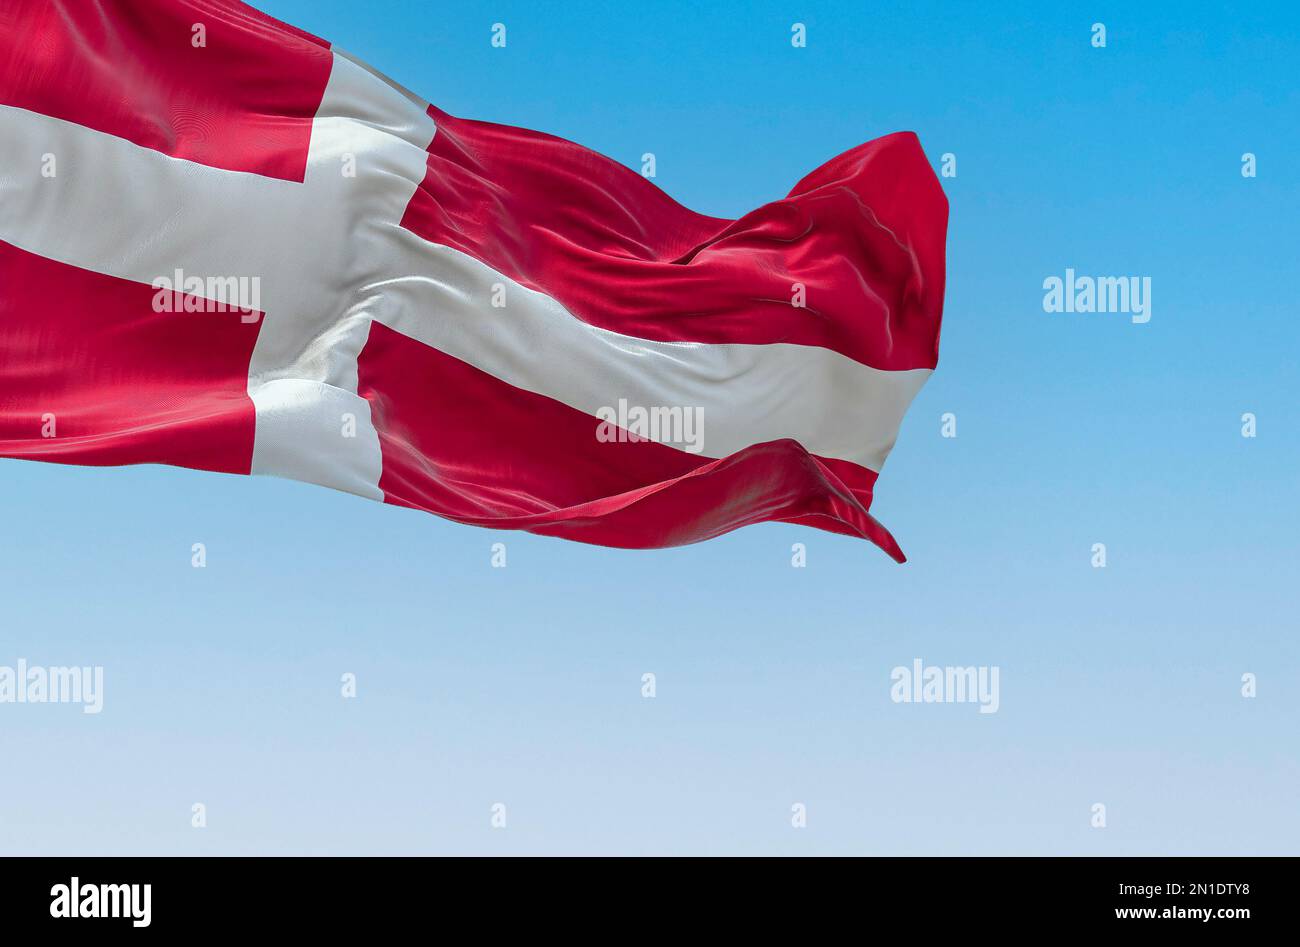 Denmark national flag waving in the wind on a clear day. The Kingdom of Denmark is a Nordic country in Northern Europe. Fluttering fabric. 3d illustra Stock Photo